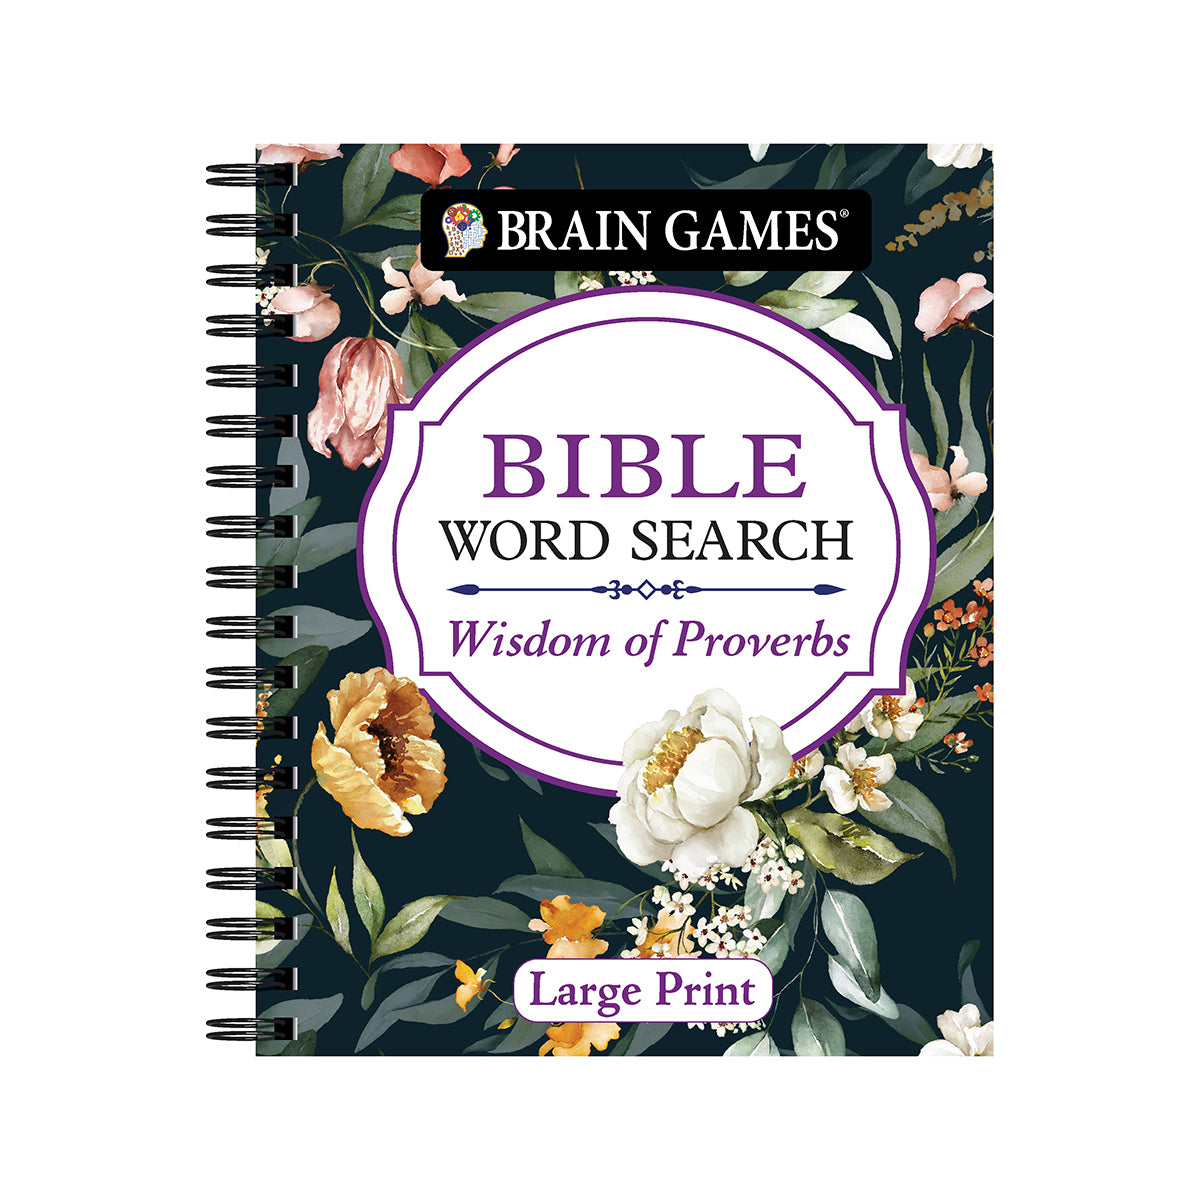 Brain Games Bible Word Search: Wisdom of Proverbs Large Print